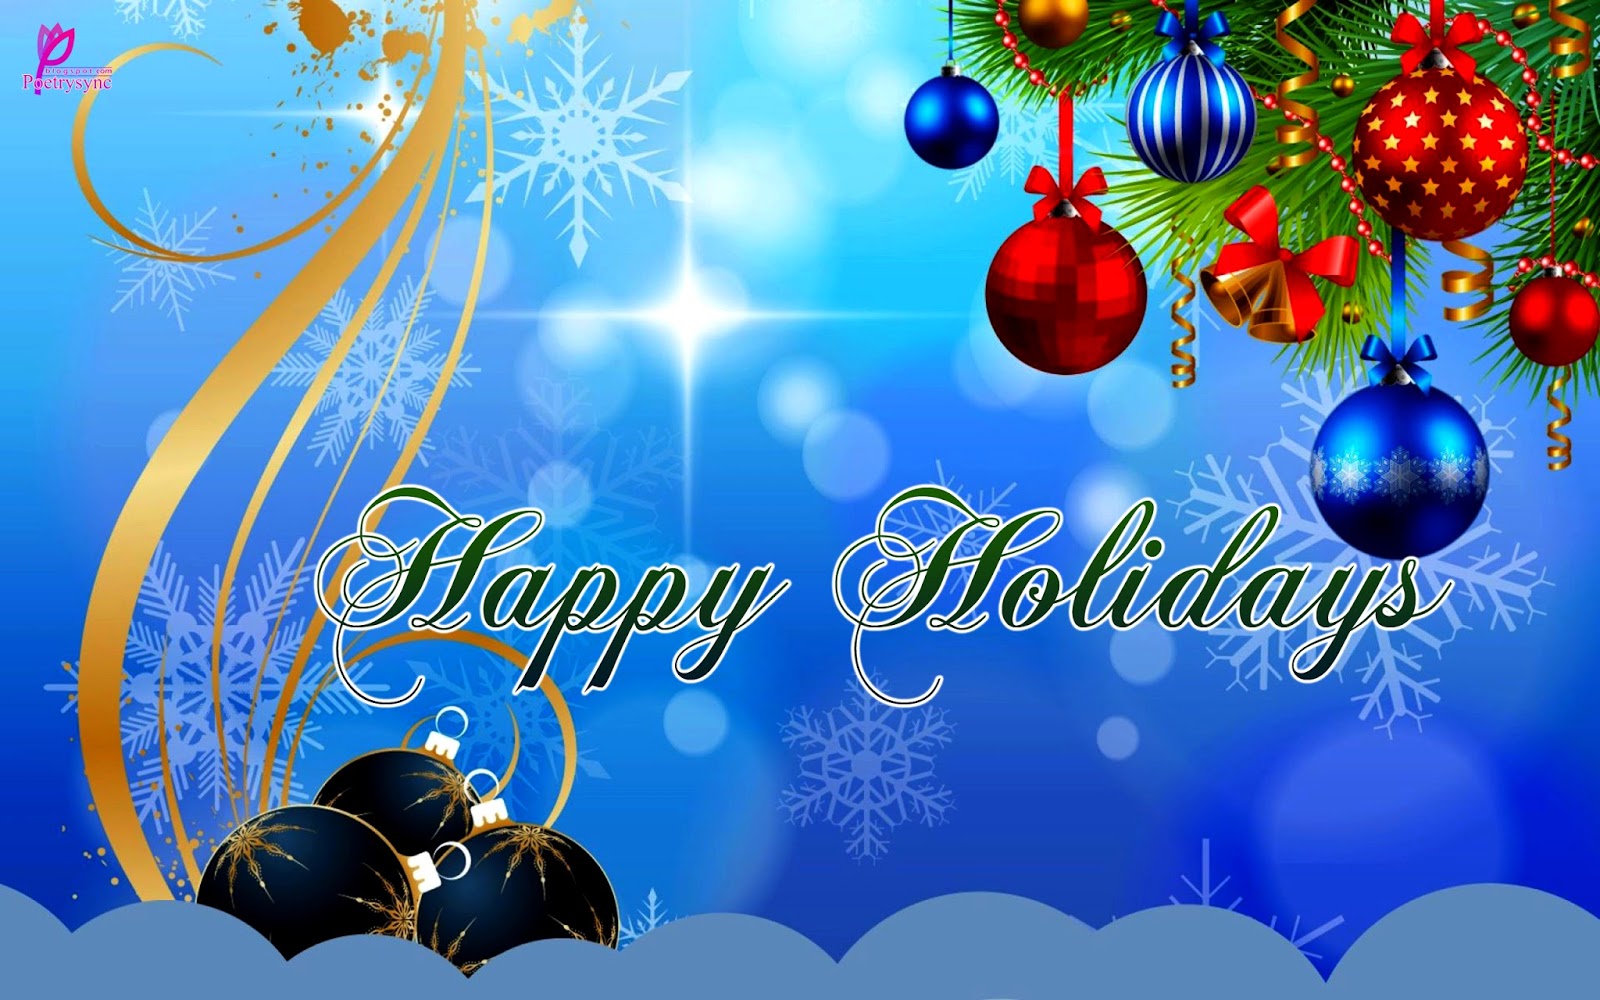 Happy Holidays And Christmas Wishes Quotes Sayings With Greetings